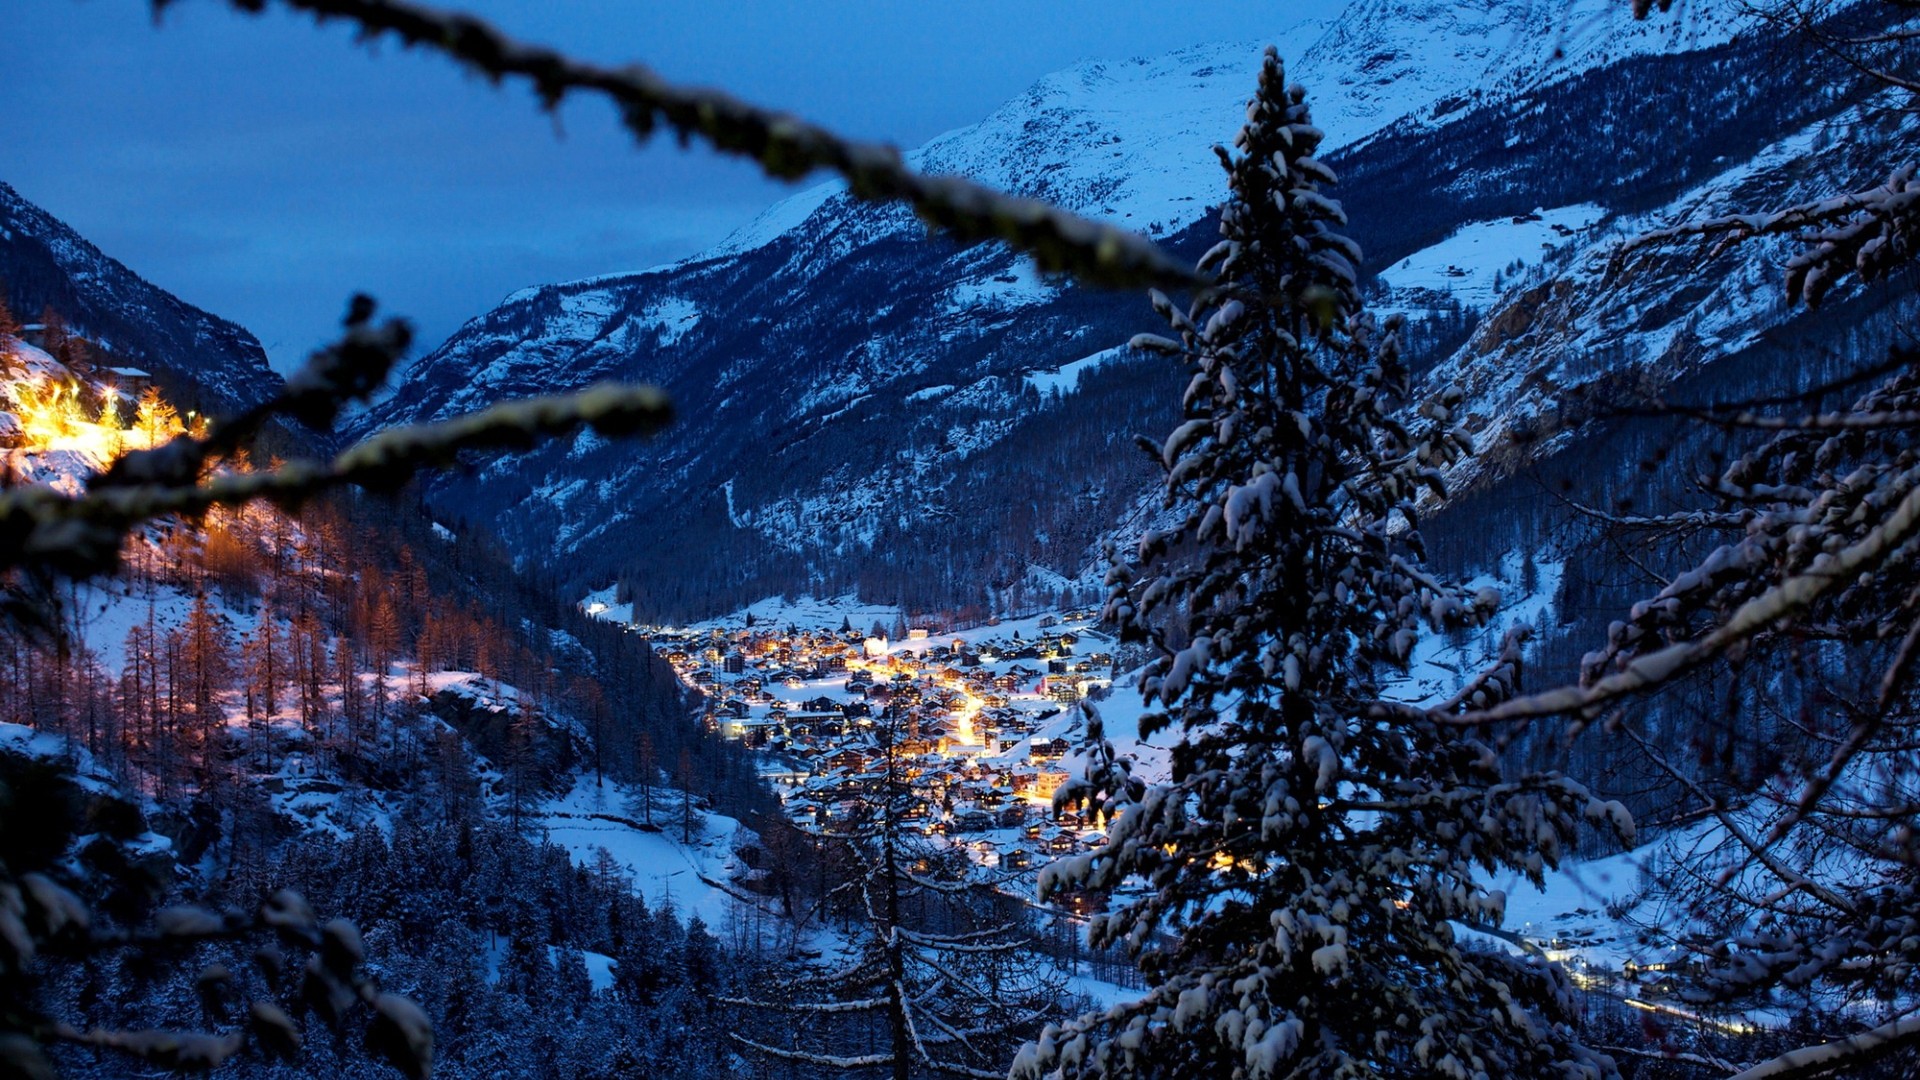 General 1920x1080 landscape night winter cityscape nature trees forest pine trees mountains Switzerland Swiss Alps valley snow evening lights village house